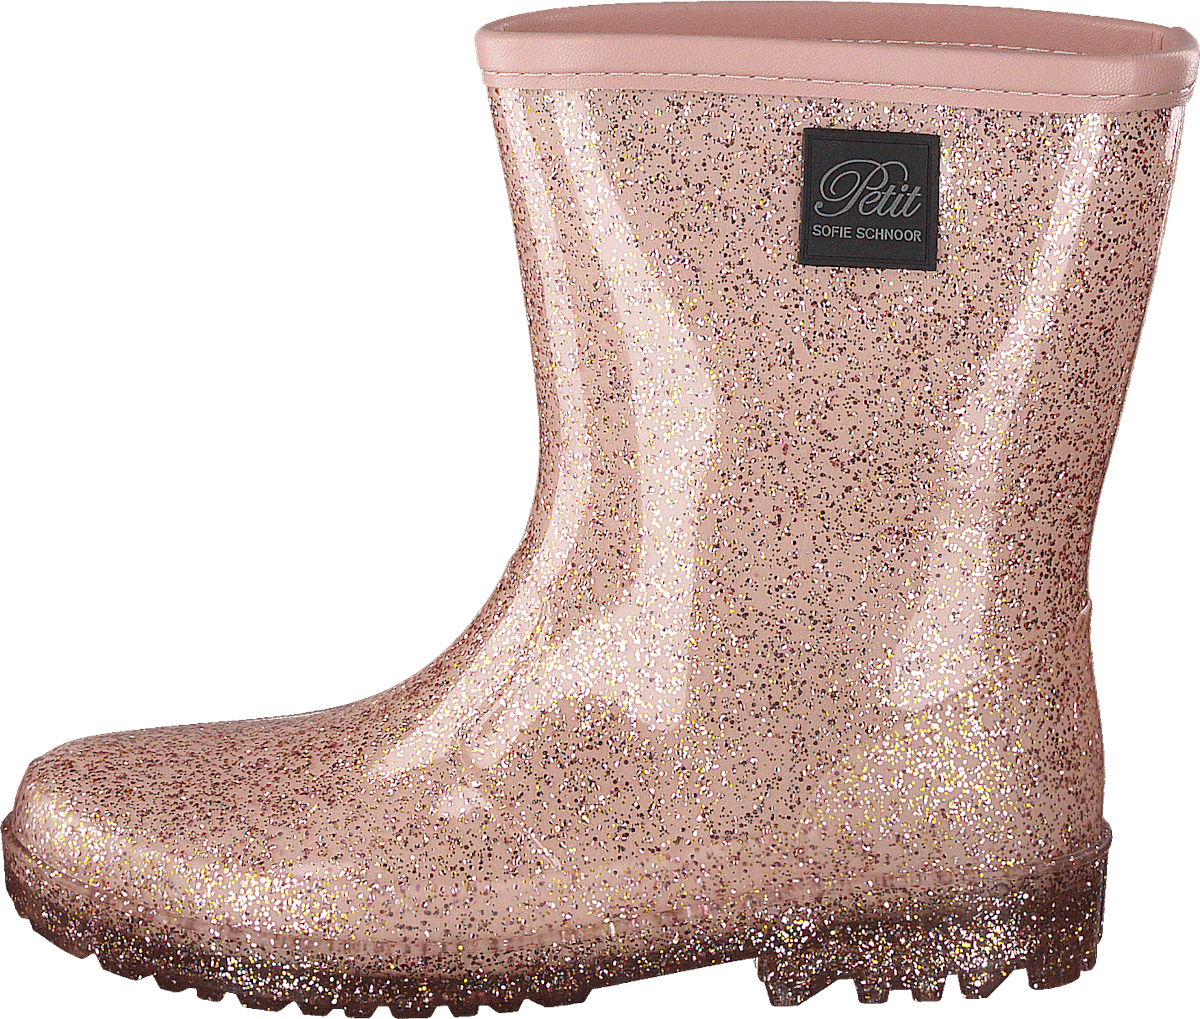 Rubber Boot Nille Rose